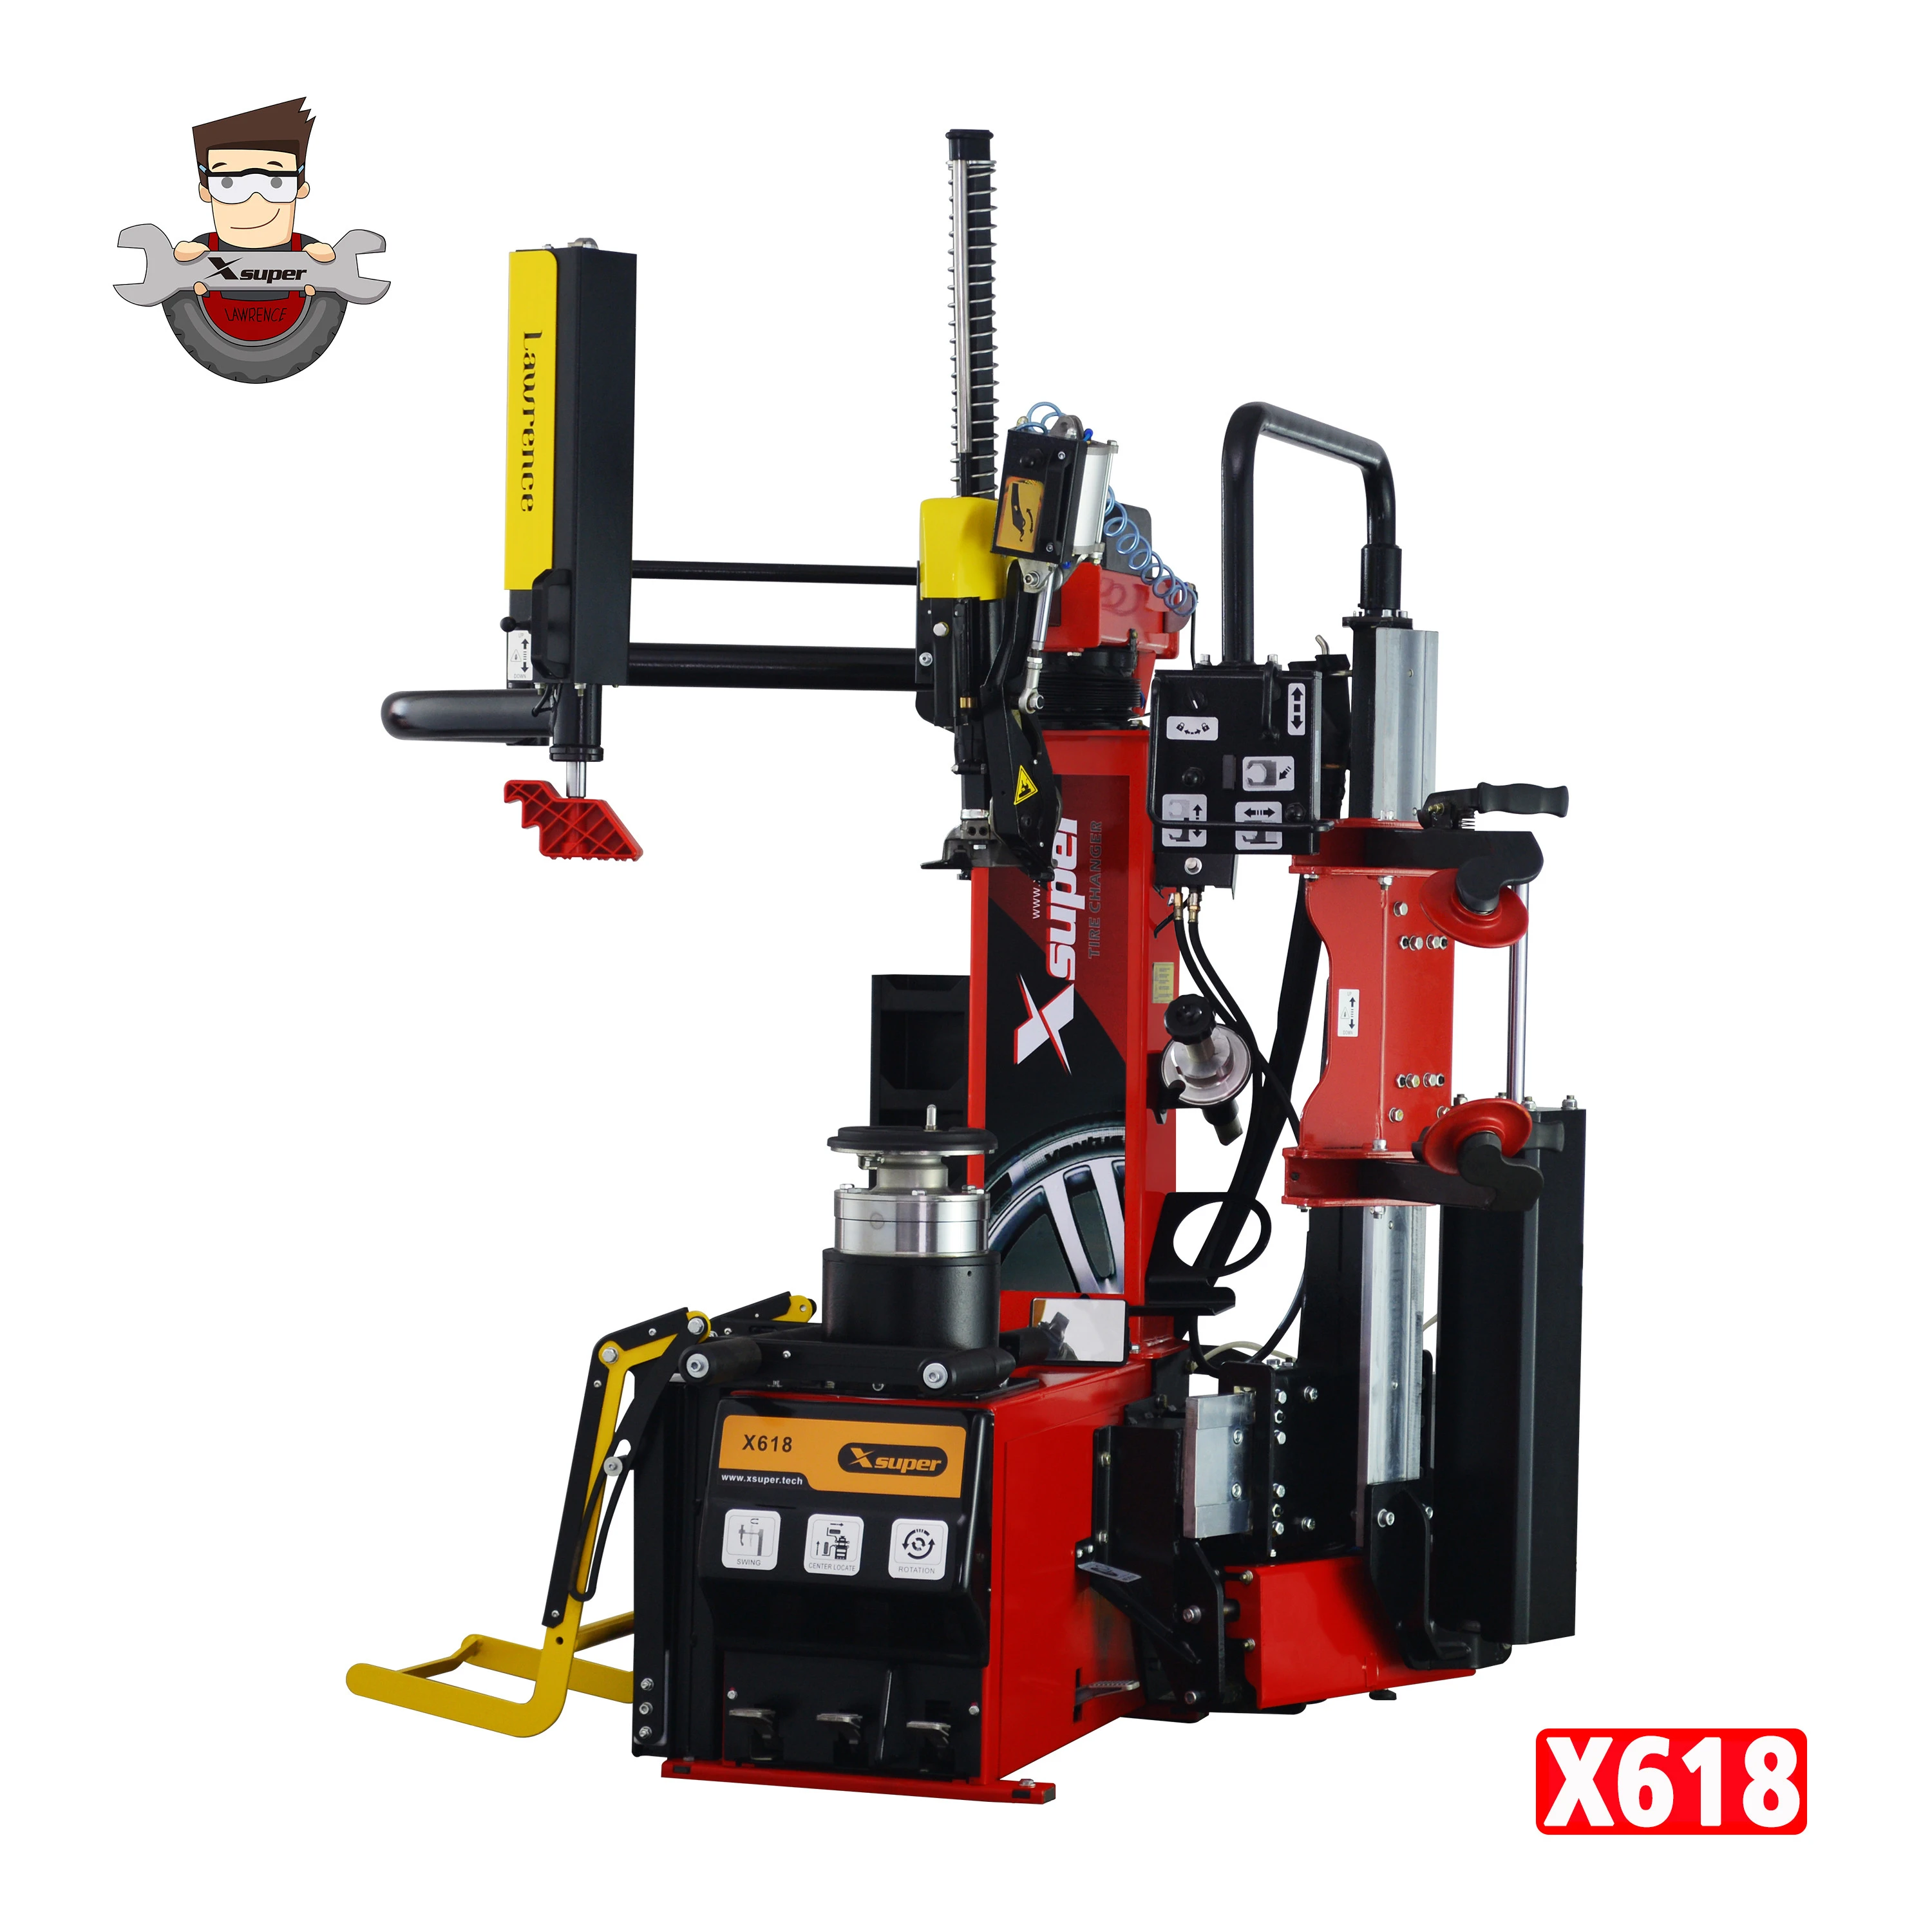 Touchless Tire Changing Machine for 32 inch Tire with Italian Design Leverless Tool  (X618)